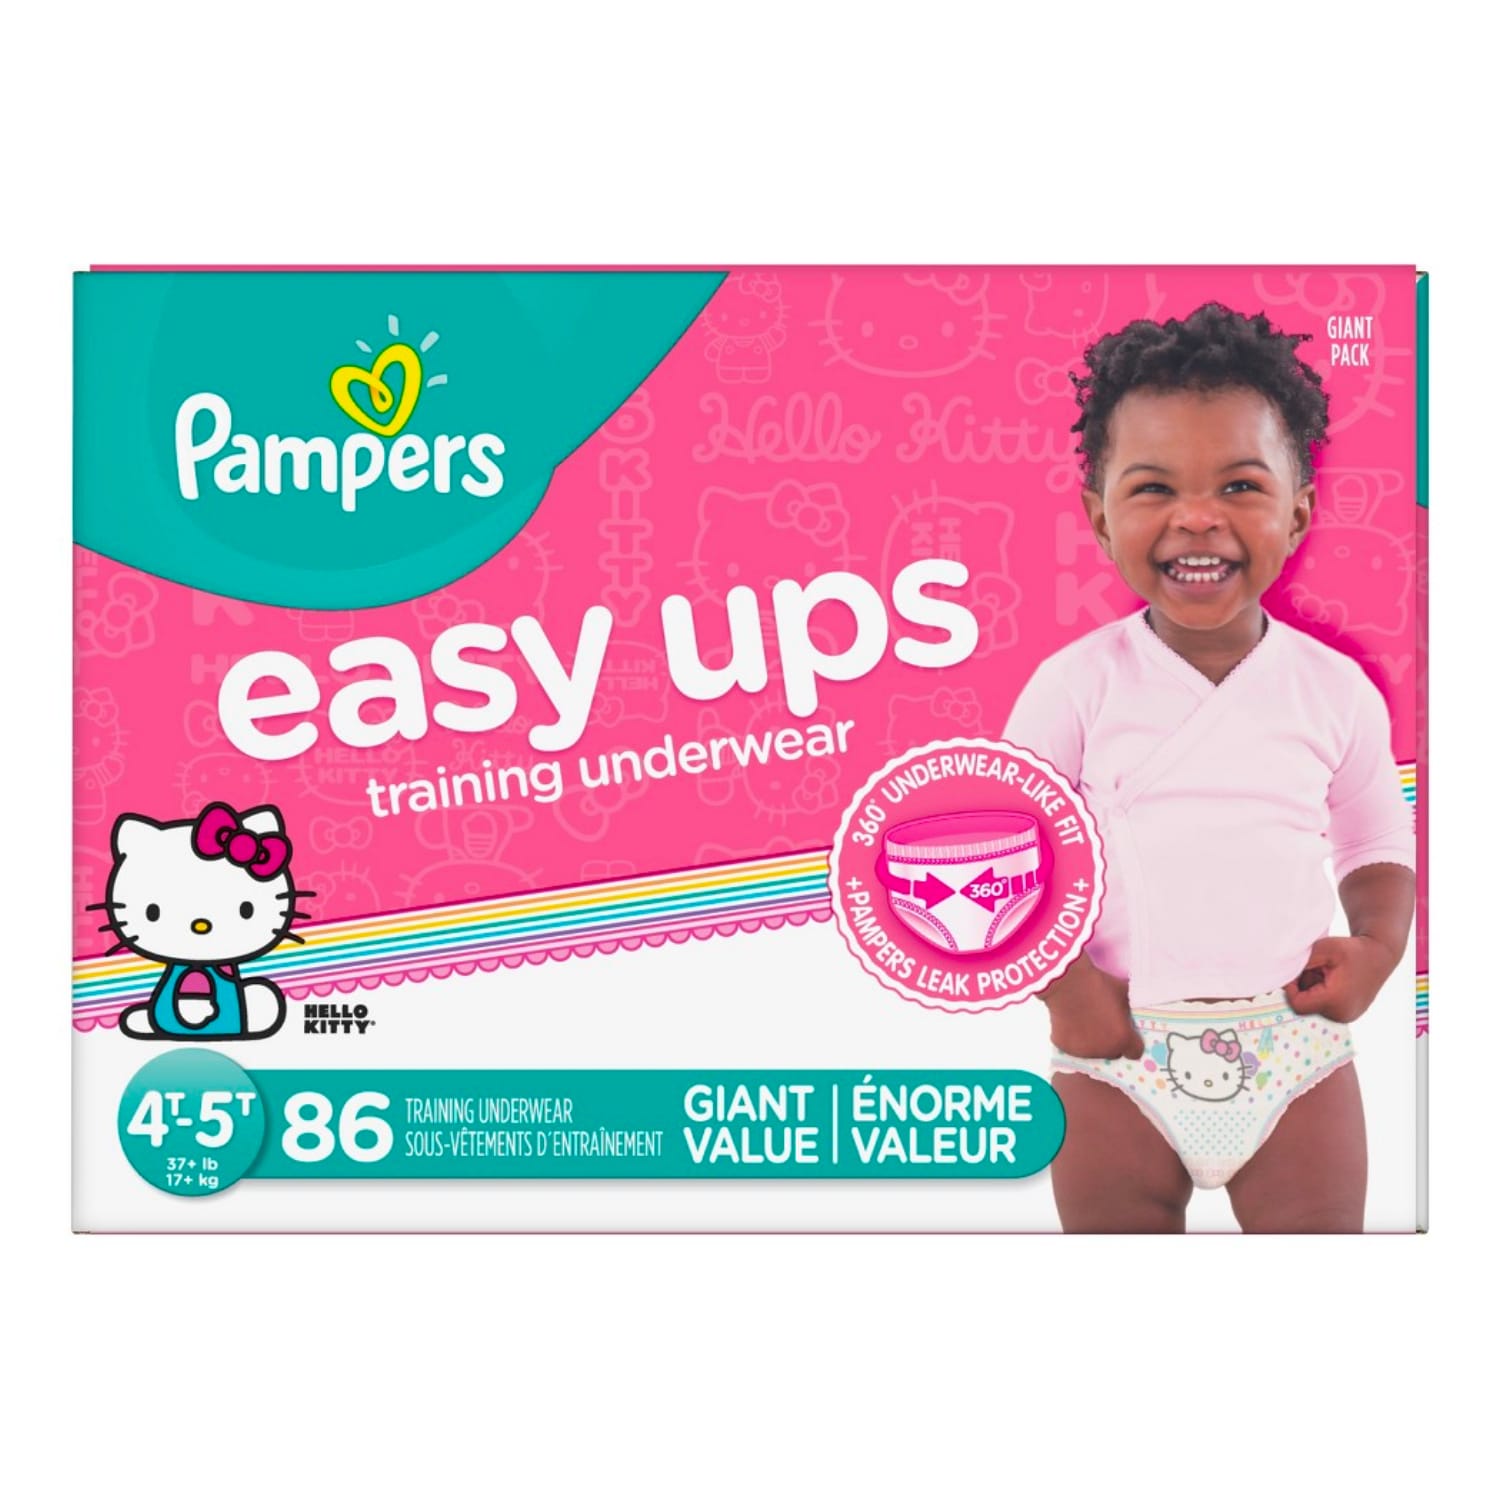 https://medaki.mo.cloudinary.net/static/products/pampers-easy-ups-training-pants-for-girls-giant-pack-size-4t-5t-86-count.webp